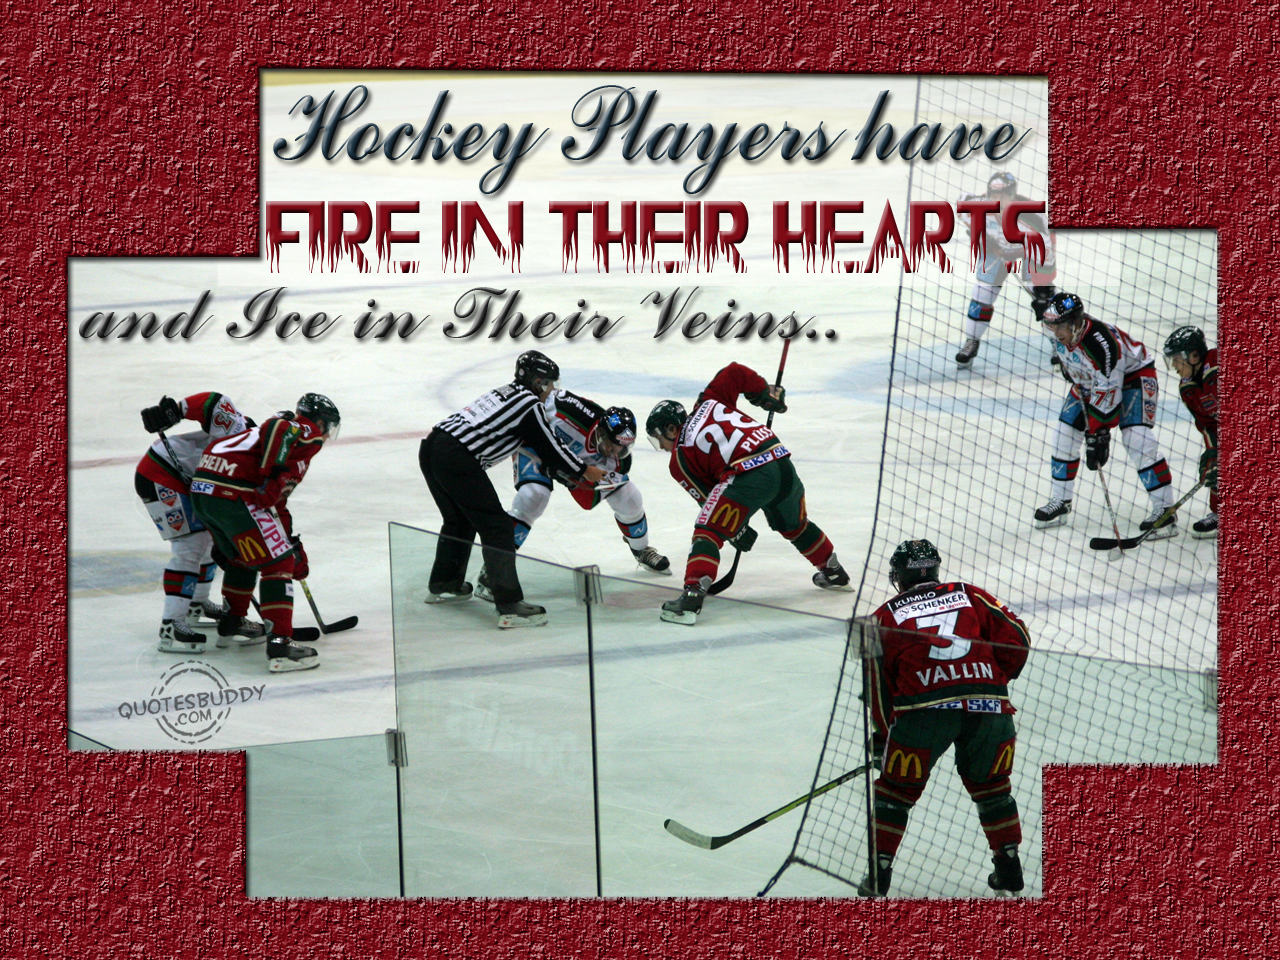 Magazines-time: Image for famous hockey quotes and sayings 